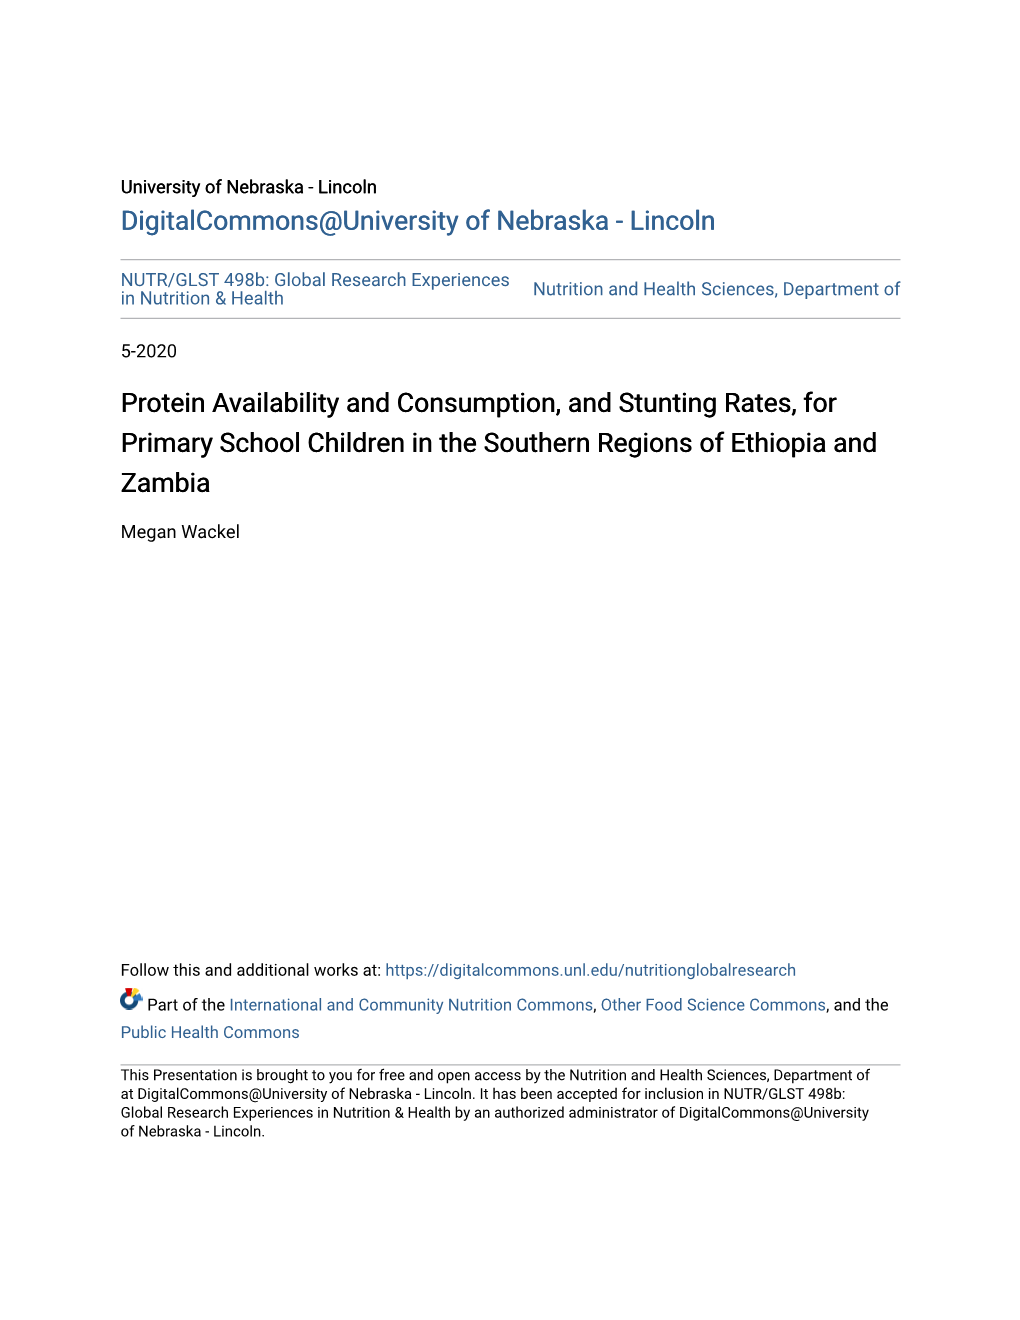 Protein Availability and Consumption, and Stunting Rates, for Primary School Children in the Southern Regions of Ethiopia and Zambia